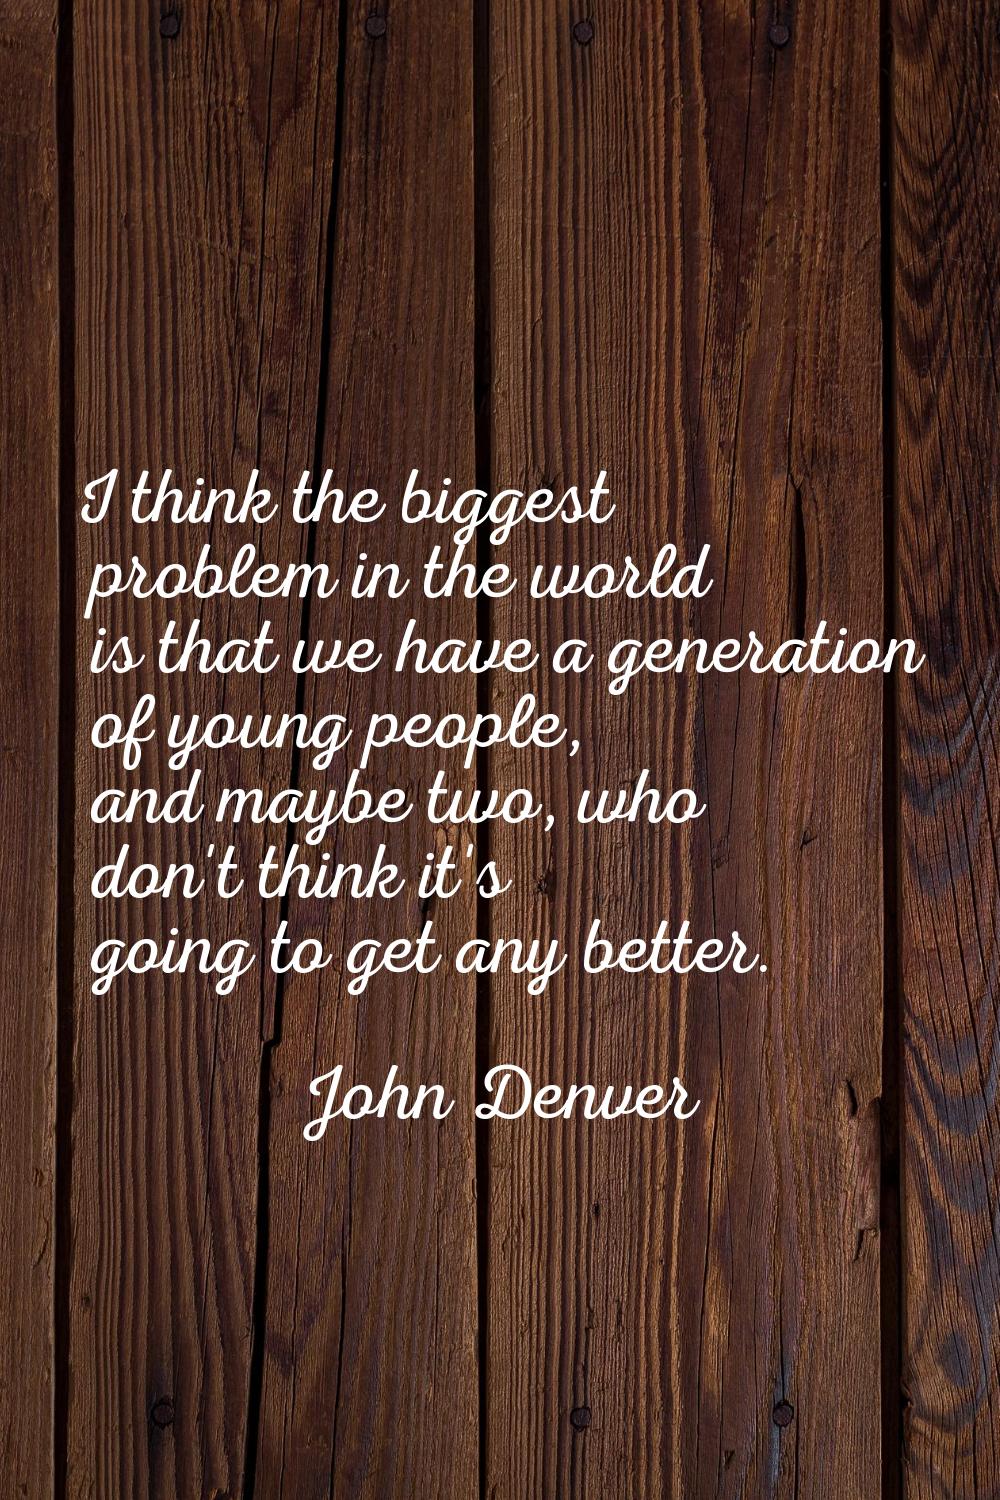 I think the biggest problem in the world is that we have a generation of young people, and maybe tw